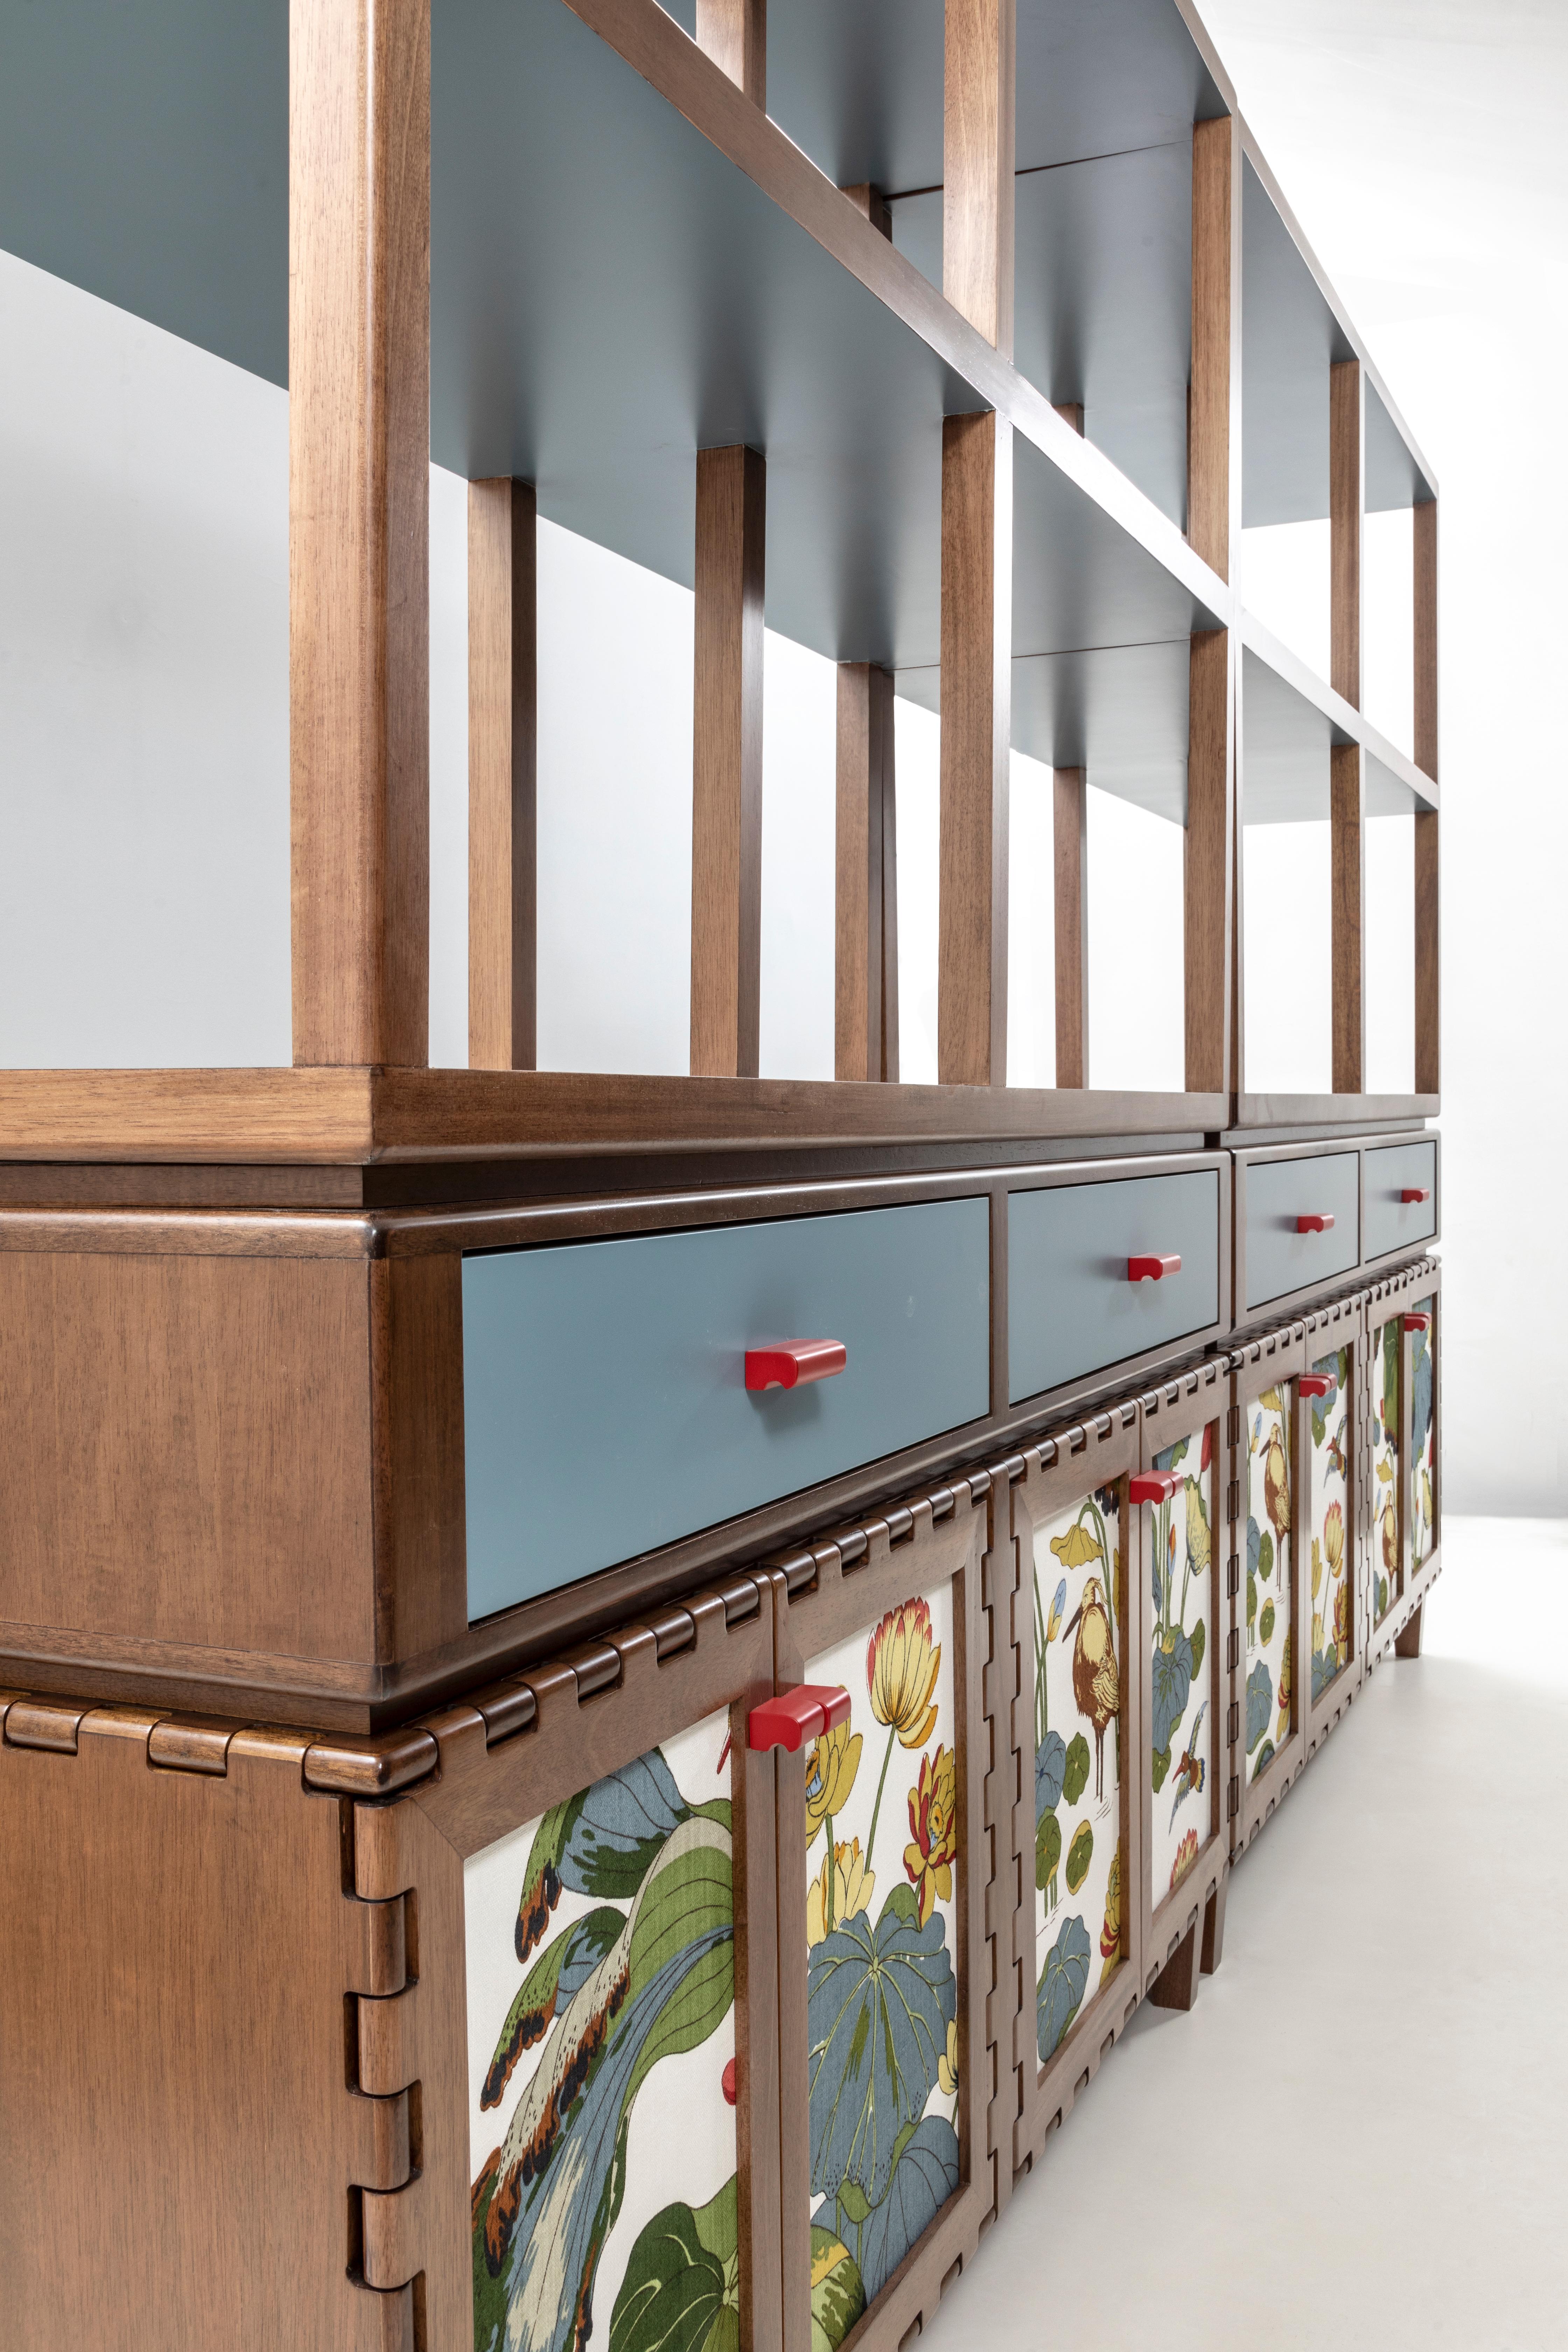 Handcrafted sideboard cabinet in wood with Joseph Frank fabric insert. The wood highlights the simplicity of the hinged frame design details. The piece comes with drawers on top and a shelving system as accessory, turning the piece into a functional